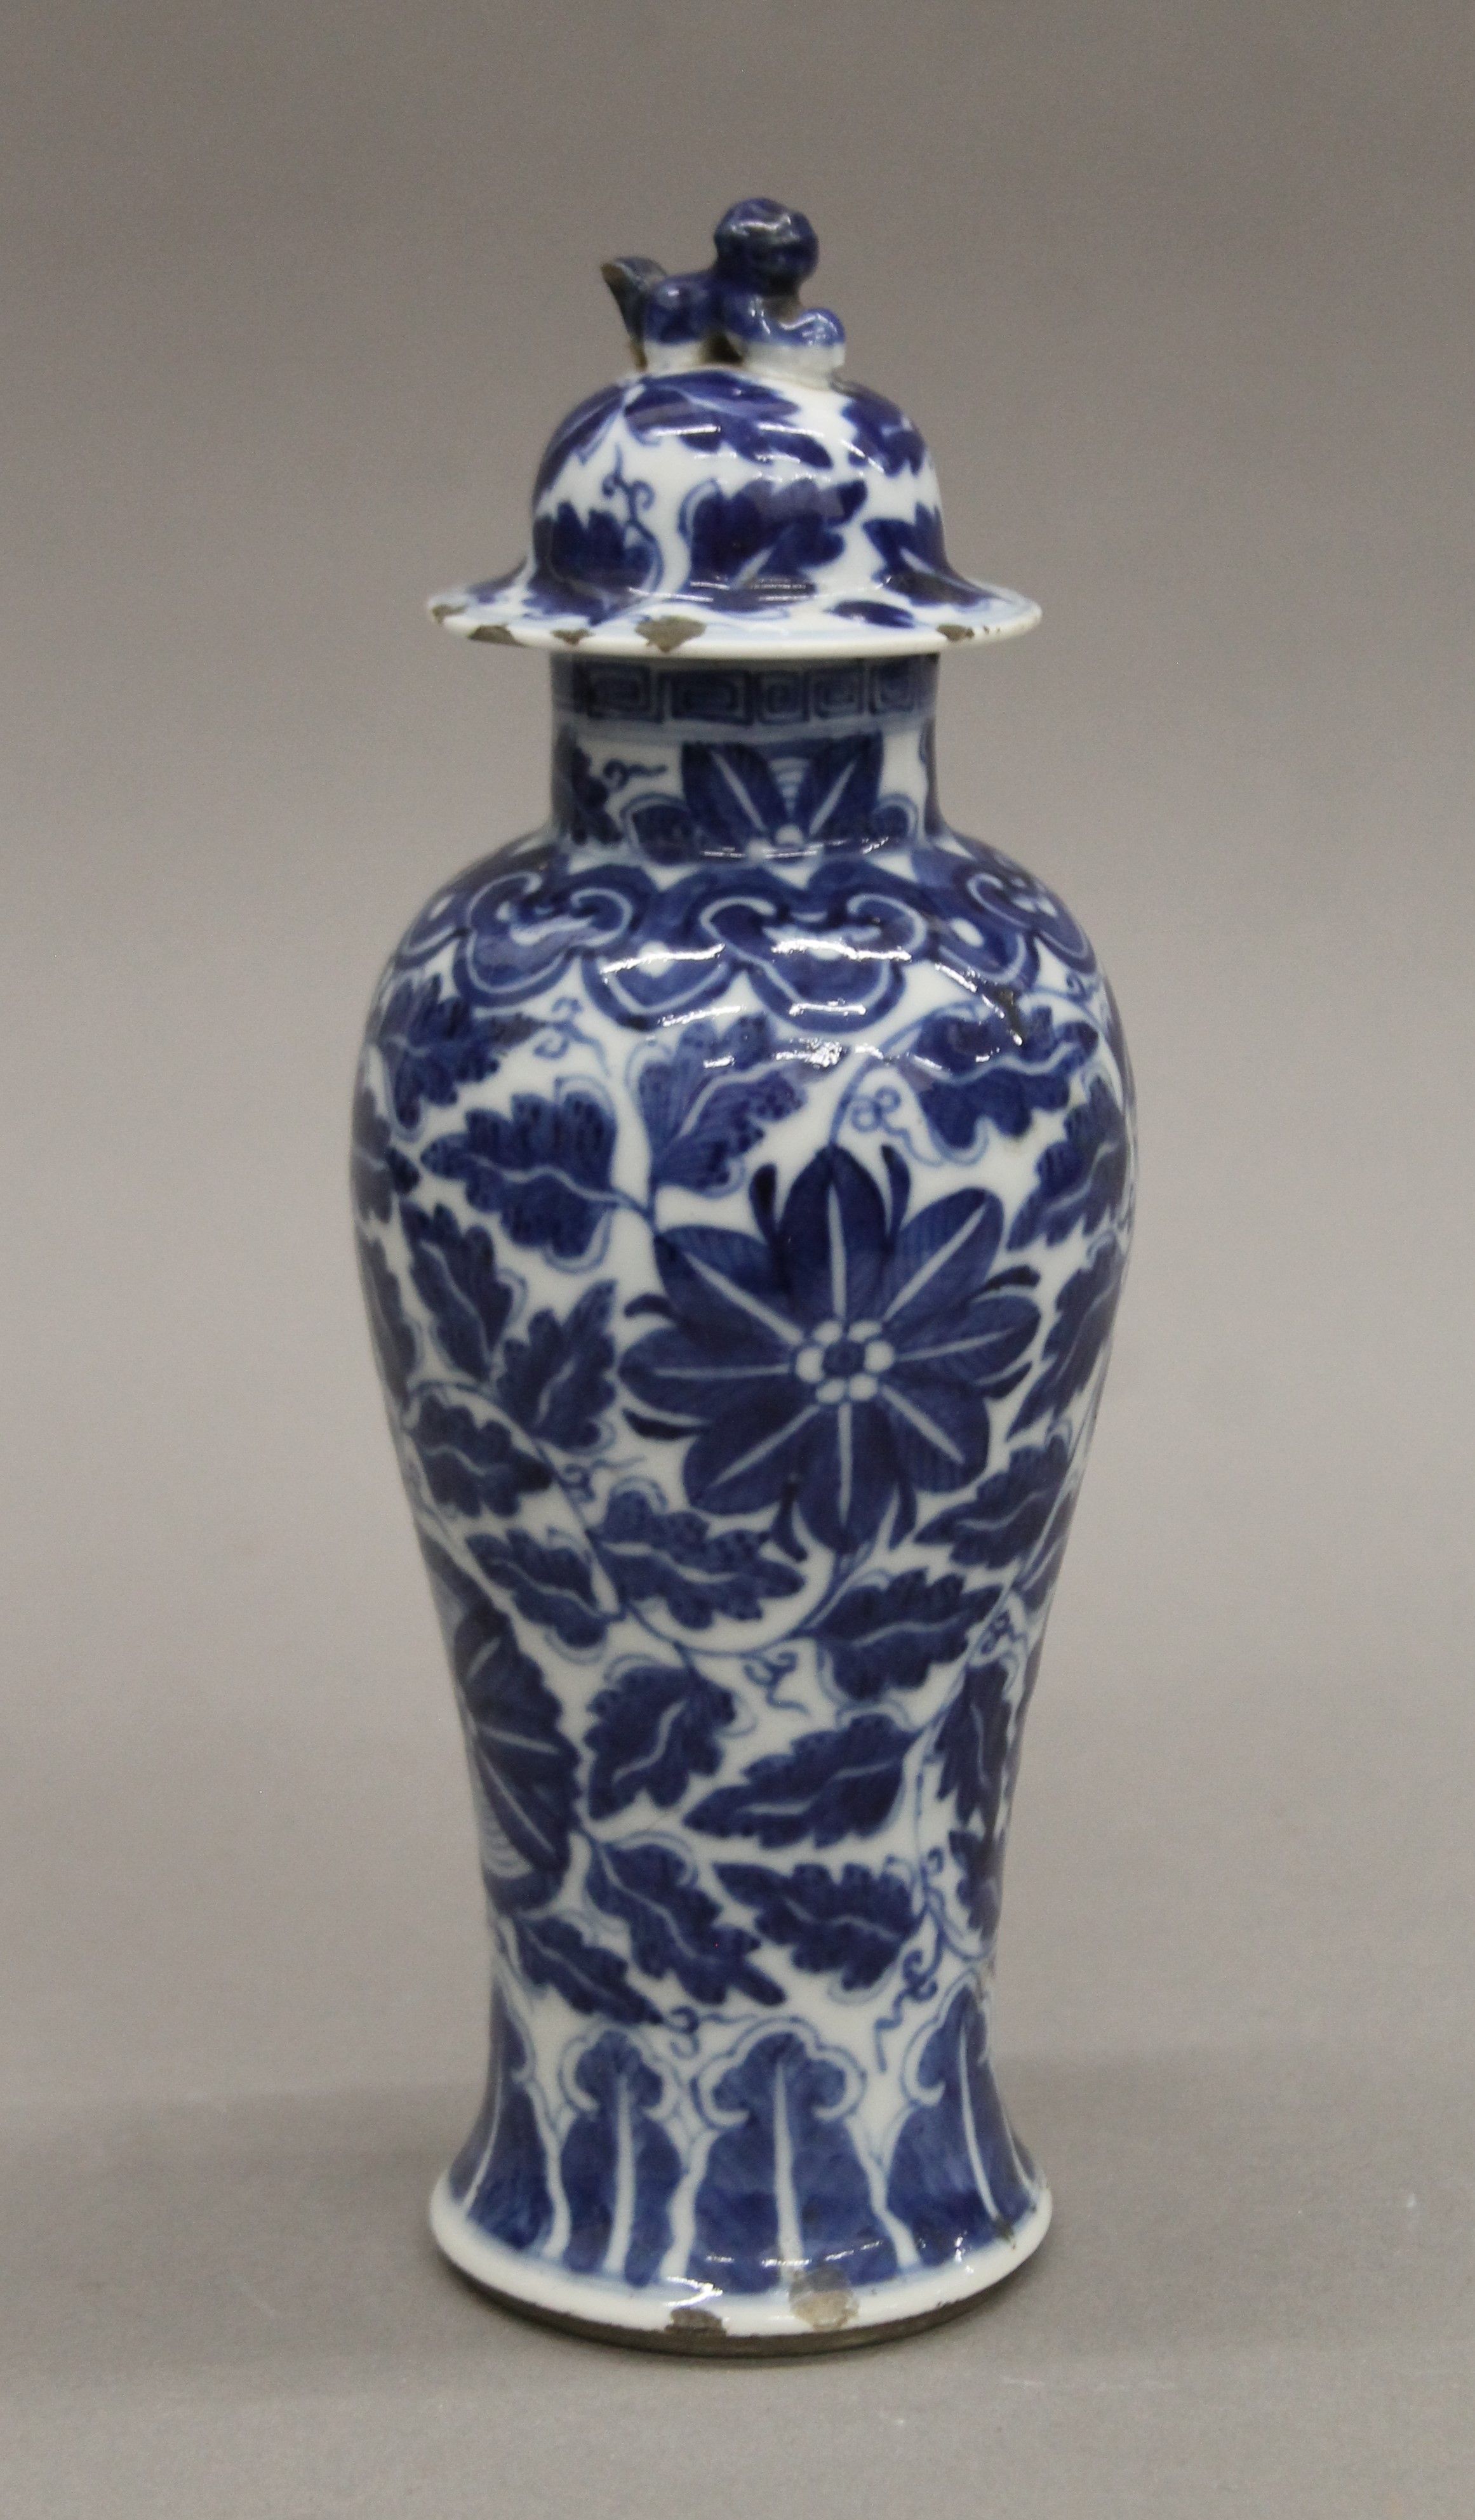 Two 19th century Chinese blue and white porcelain vases. The largest 22 cm high. - Image 8 of 10